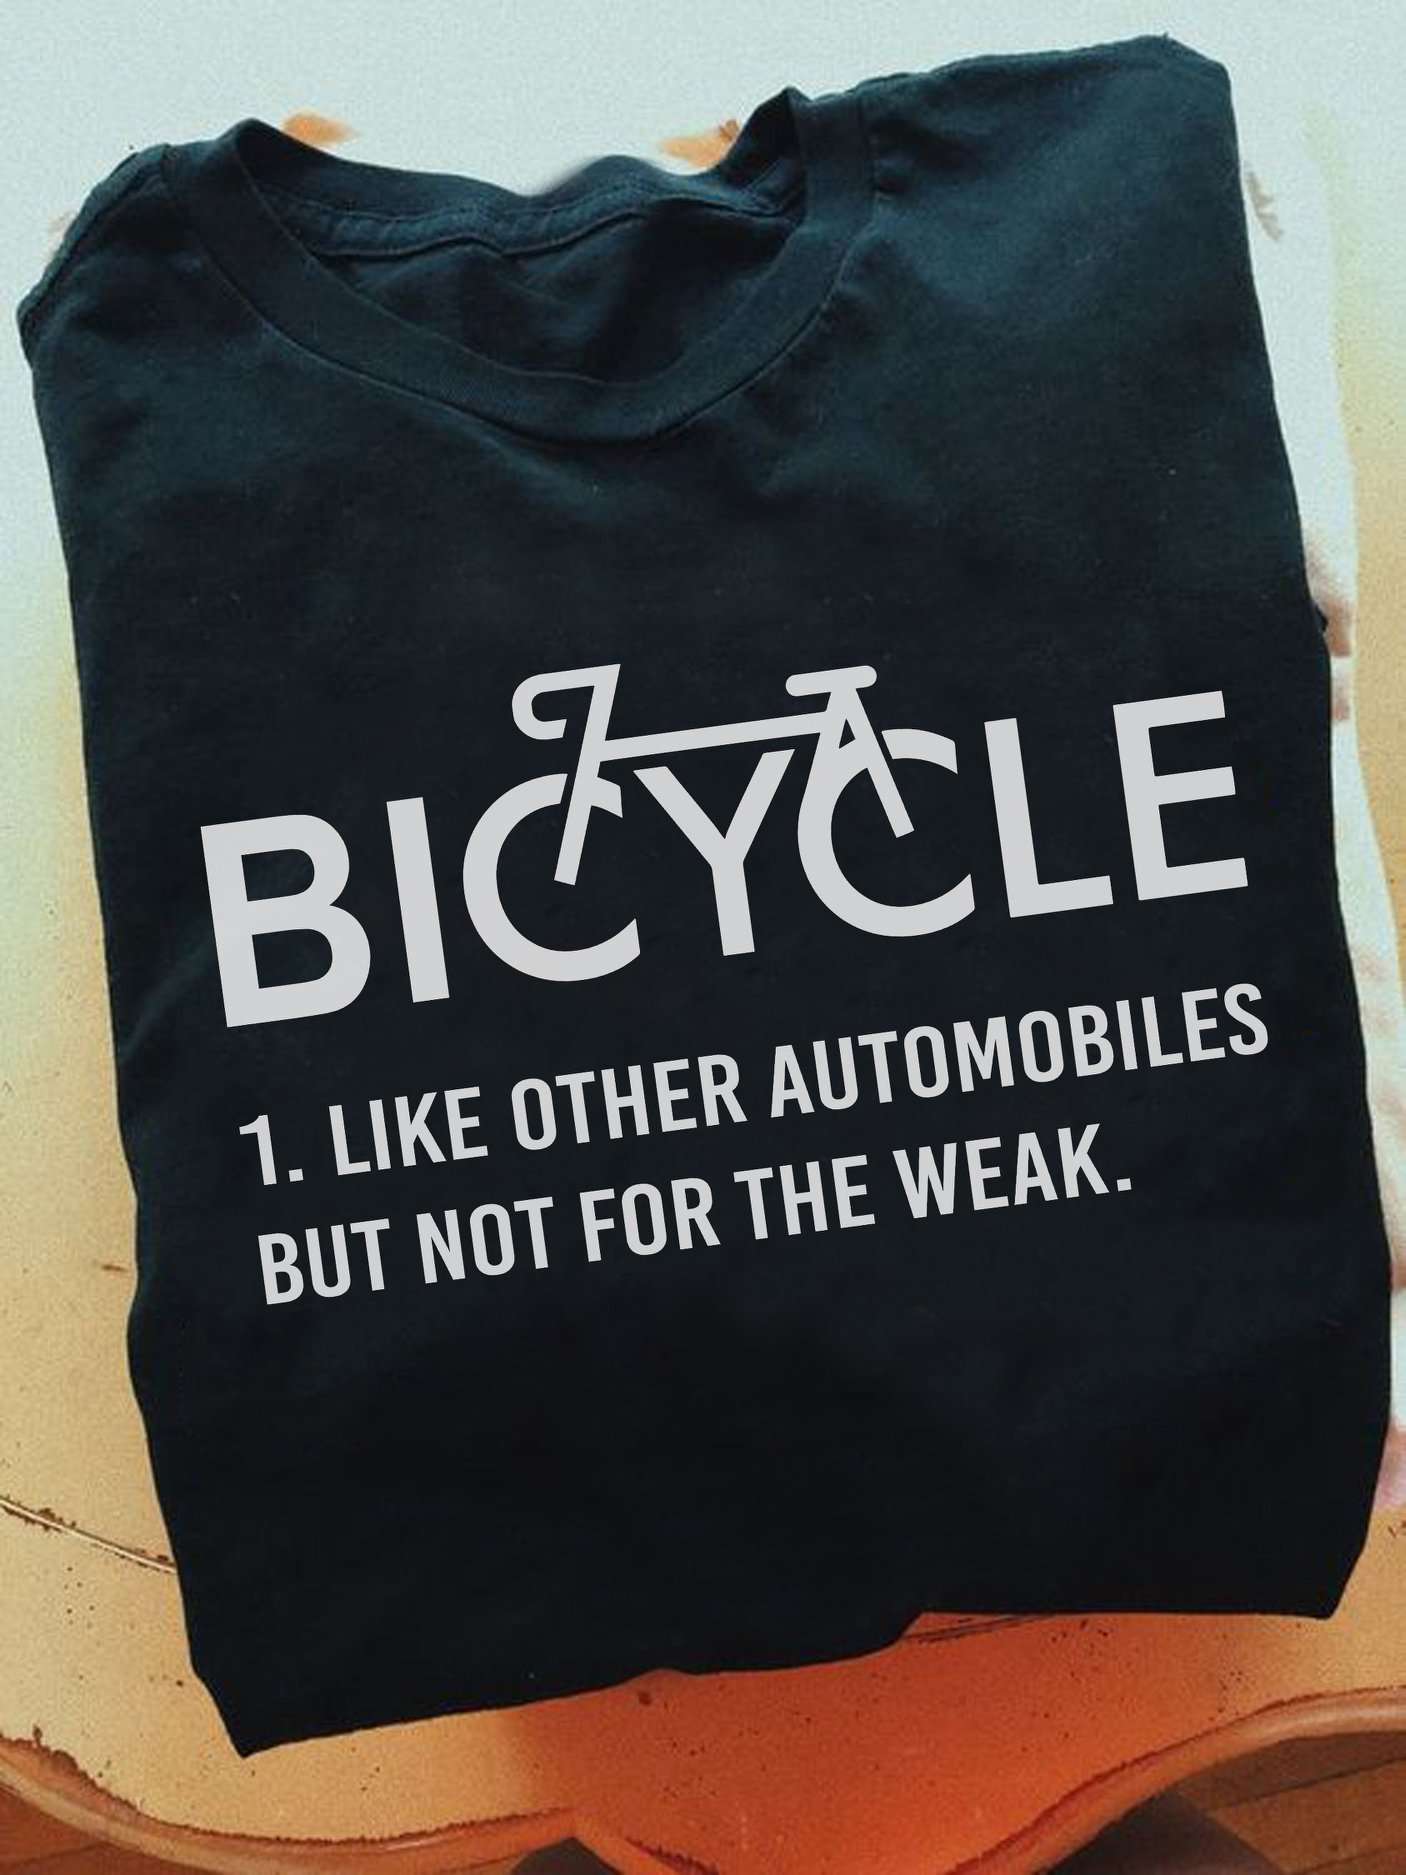 Bicycle like other automobiles but not for the weak - Bicycle automobiles